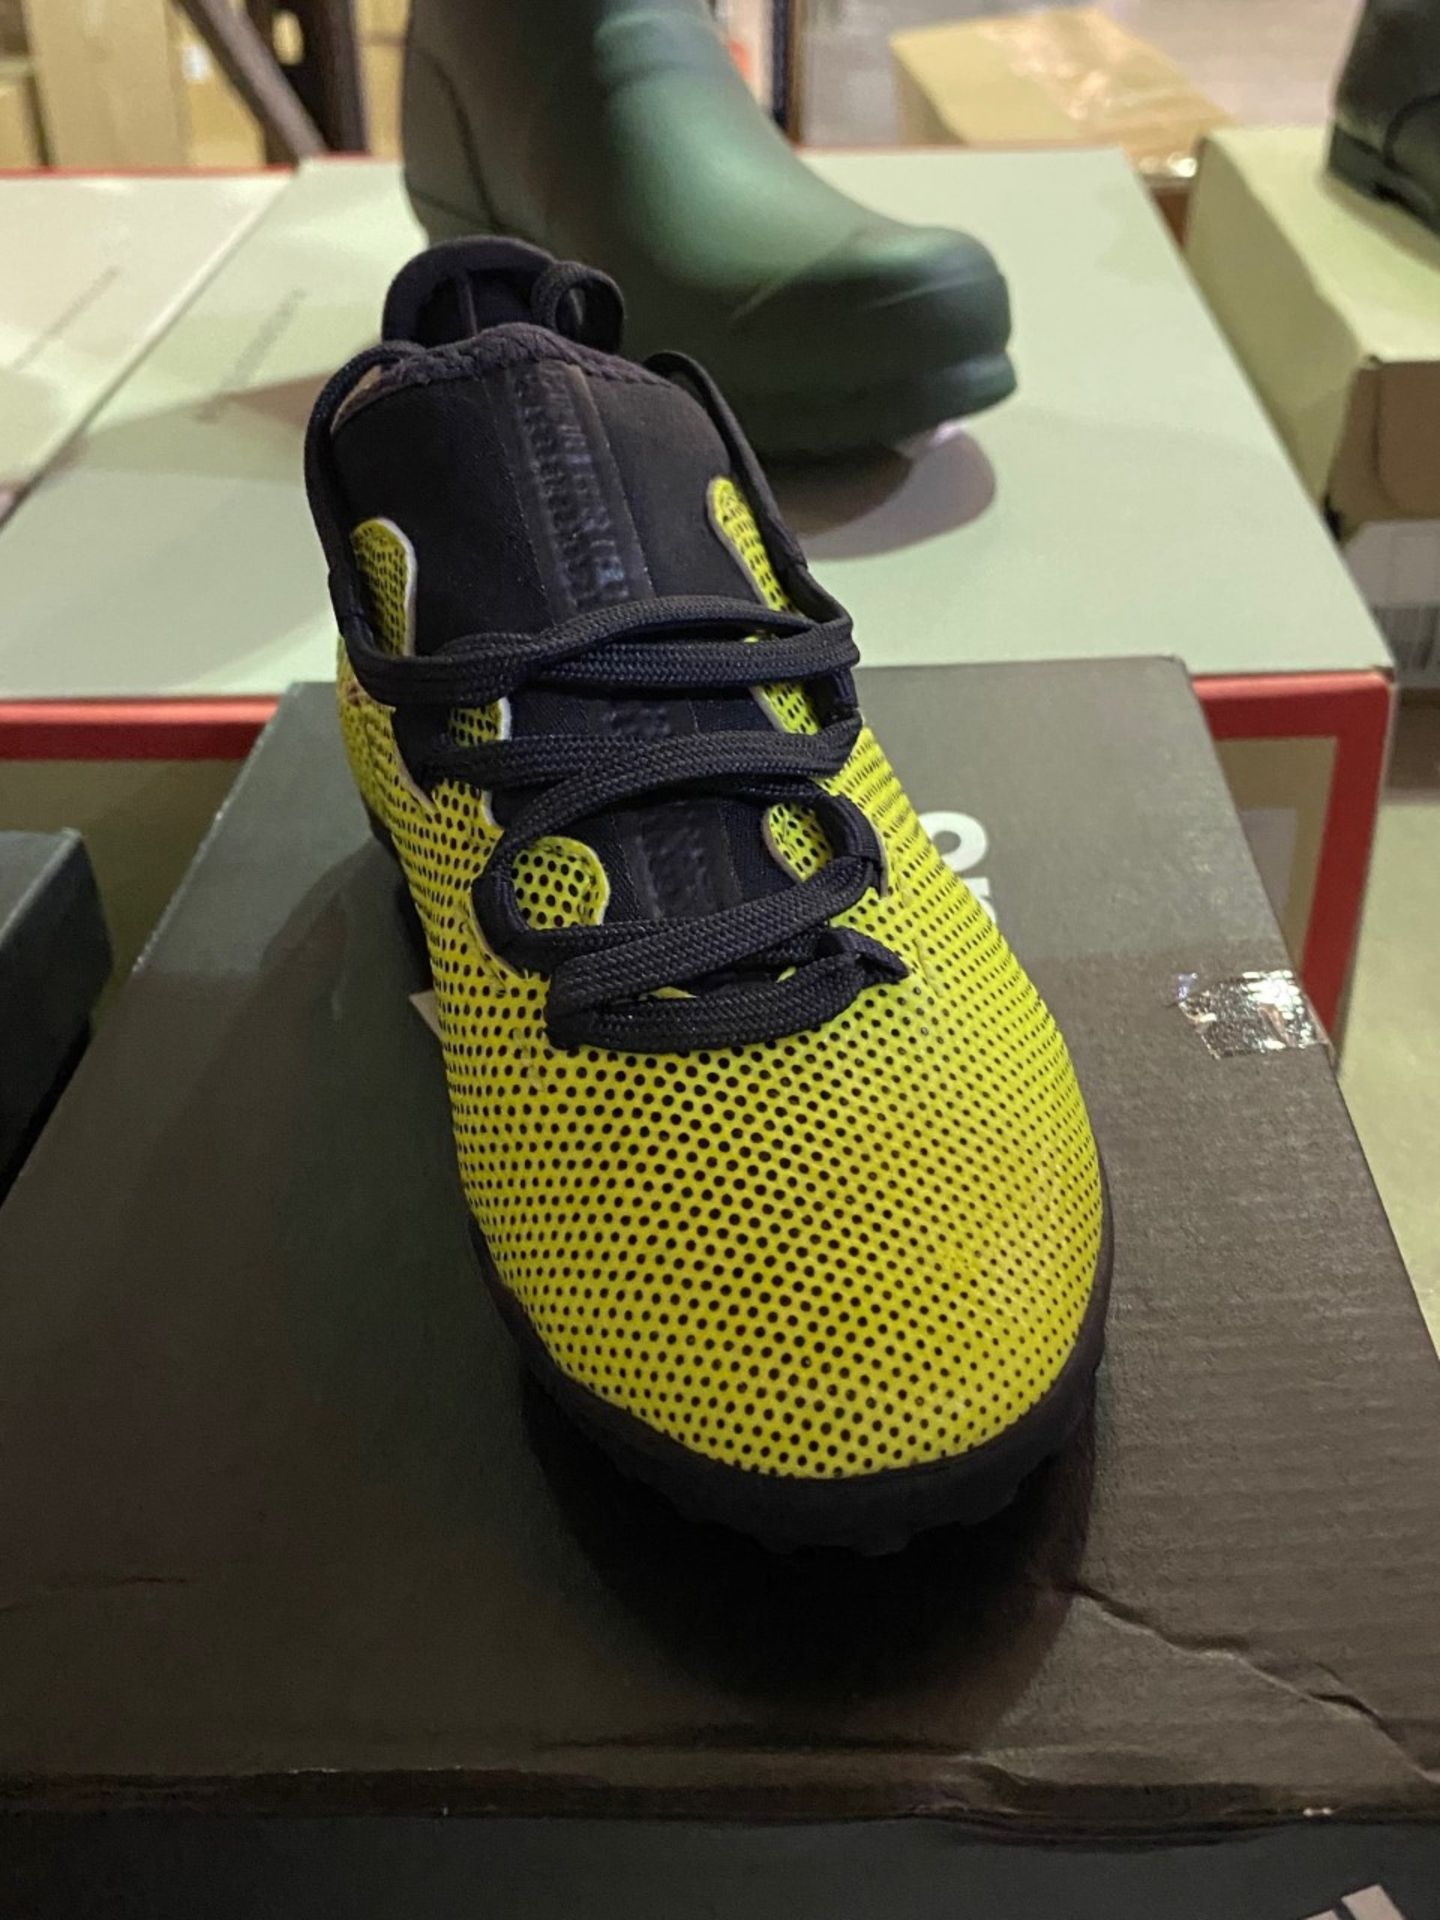 NEW & BOXED ADIDAS YELLOW X TANGO FOOTBALL BOOTS SIZE INFANT 10 (19/21) - Image 2 of 2